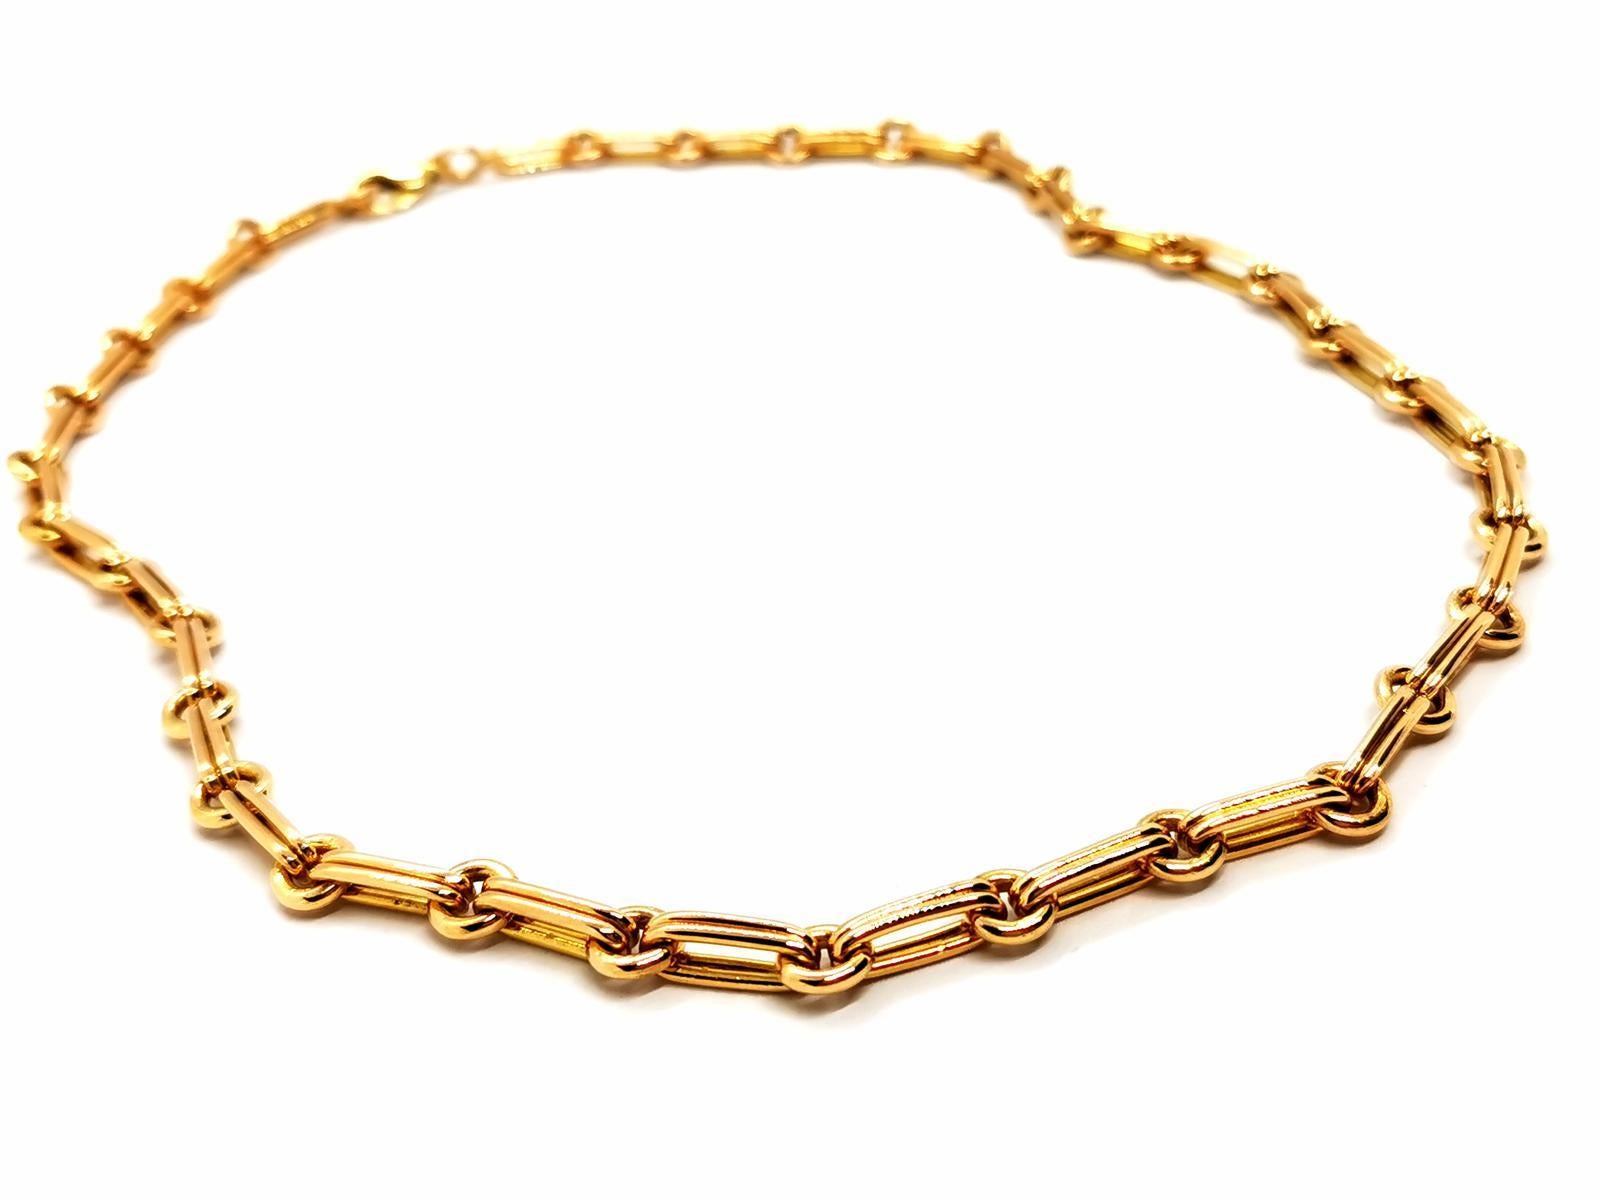 Necklace in yellow gold 750 thousandths (18 carats). alternation of round links and double oval links. length: 54 cm. round link width: 0.77. oval link width: 0.52 X 1.47. total weight: 79.89 g. eagle head punch. excellent condition.
